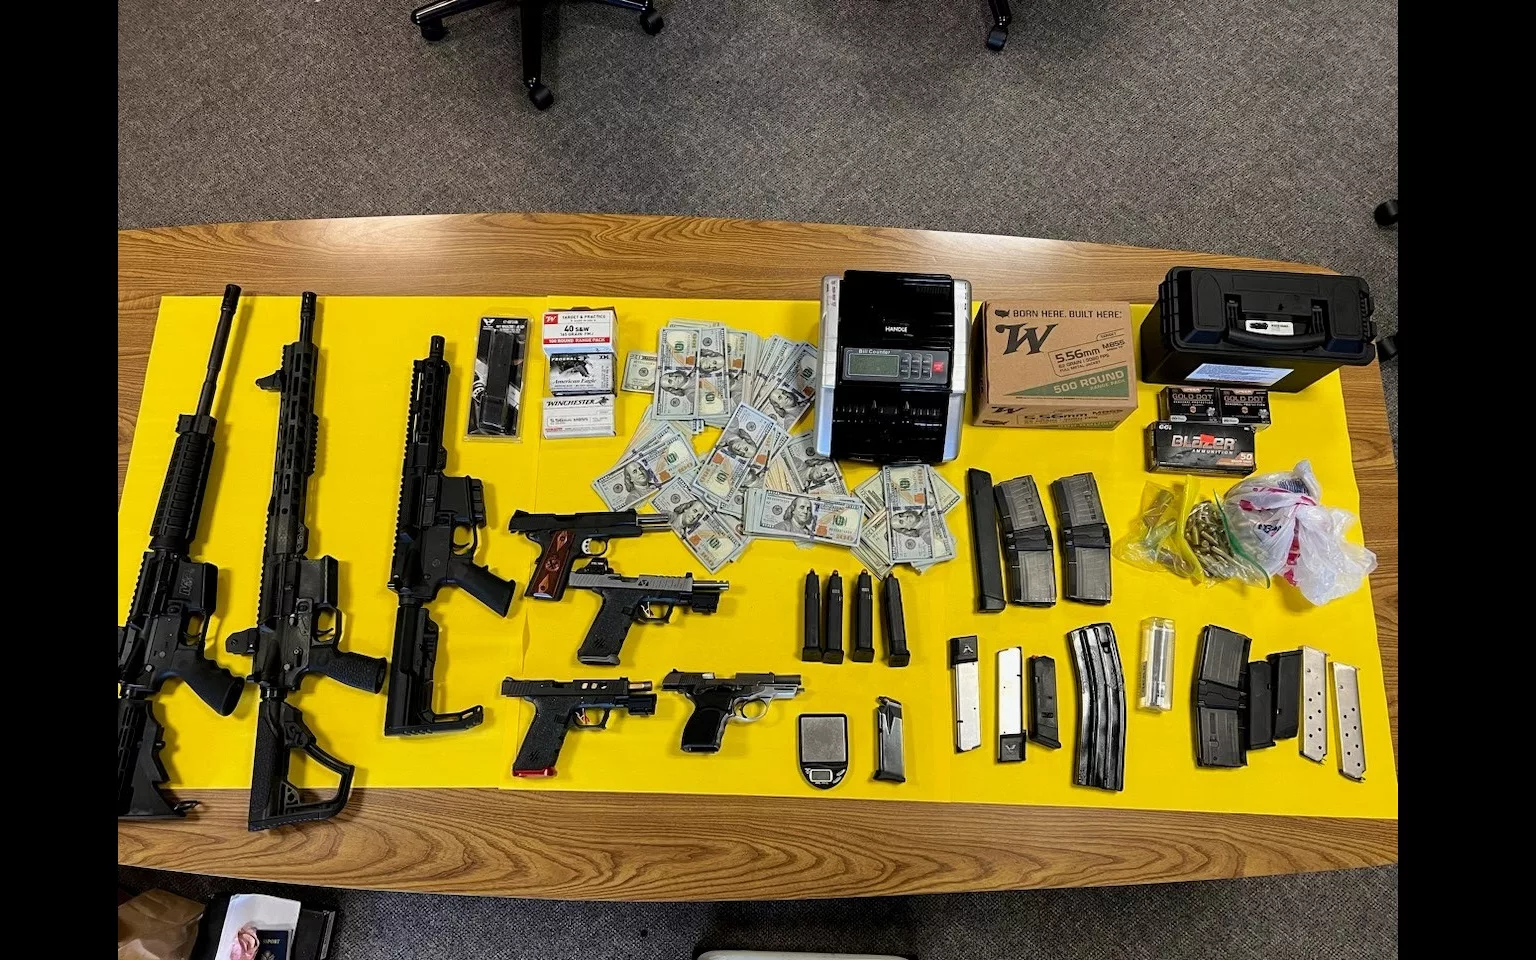 items-confiscated-from-fabian-flores-gonzalez-and-karina-flores-gonzalez-santa-rosa-police